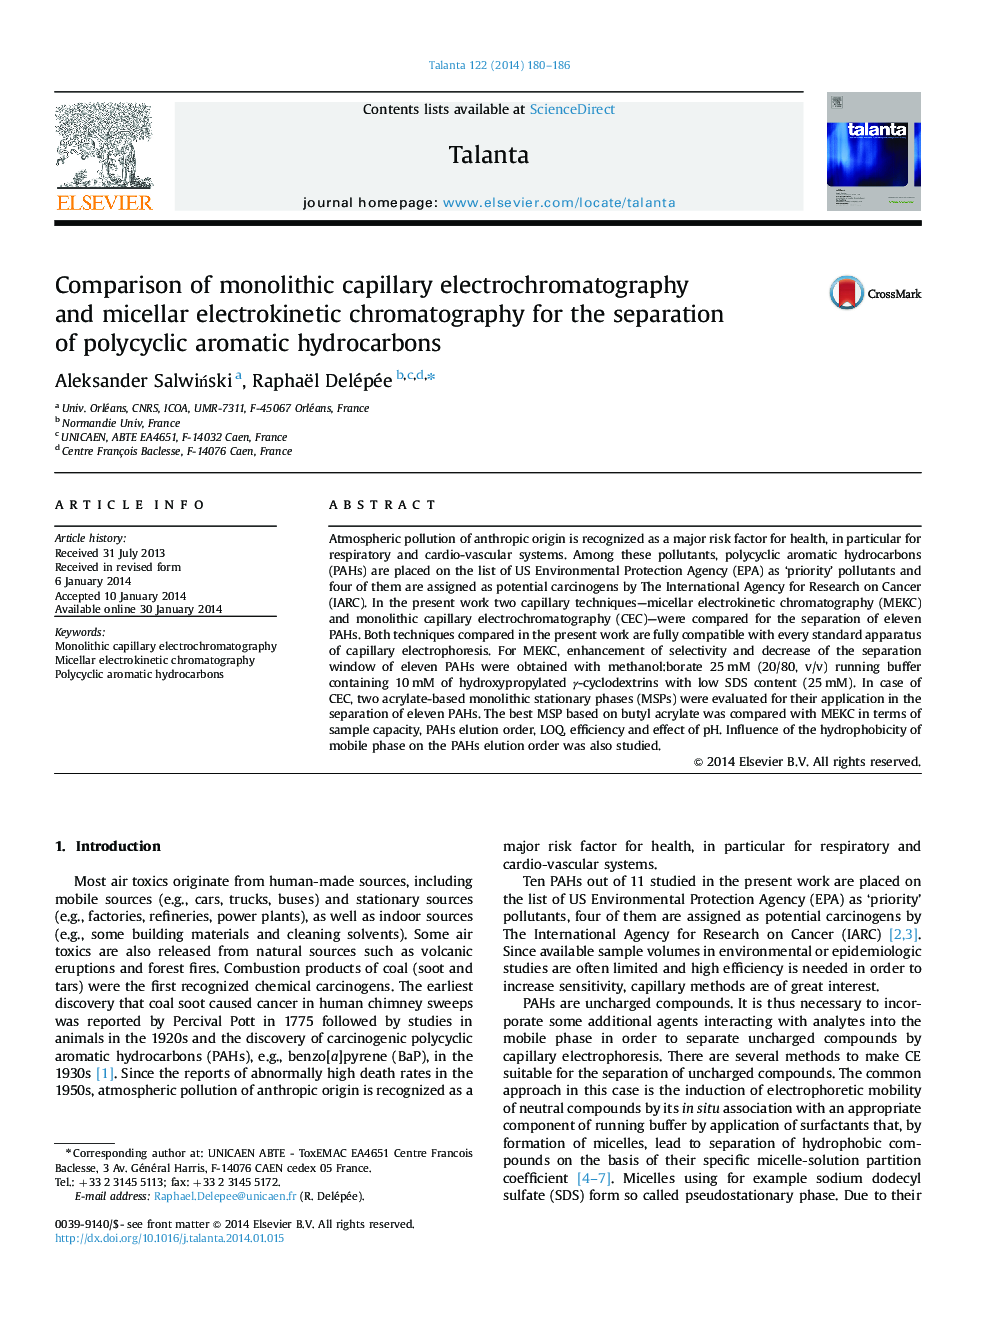 Comparison of monolithic capillary electrochromatography and micellar electrokinetic chromatography for the separation of polycyclic aromatic hydrocarbons